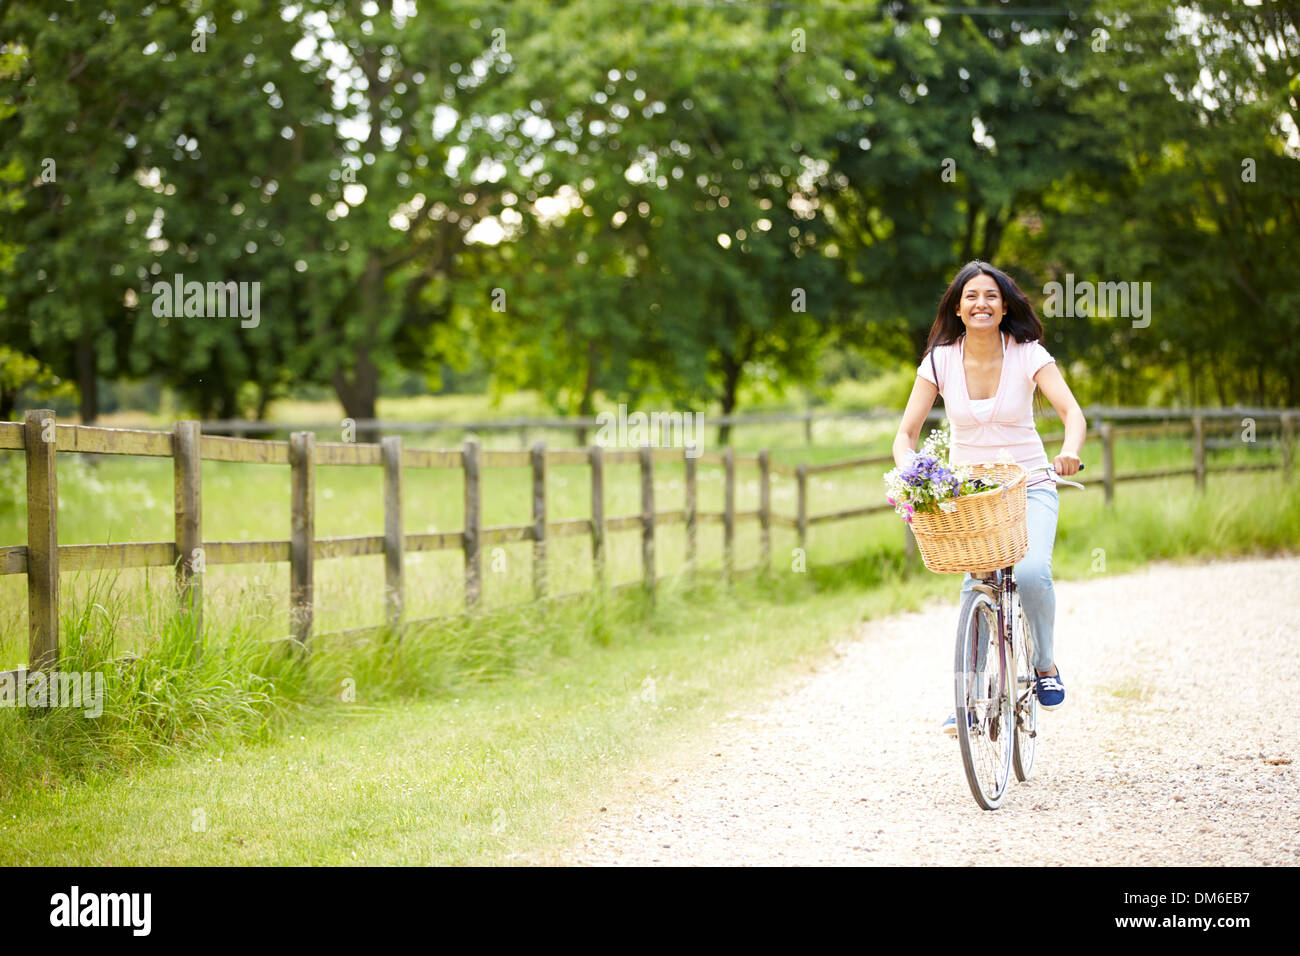 Indian Woman On Cycle Ride In Countryside Stock Photo